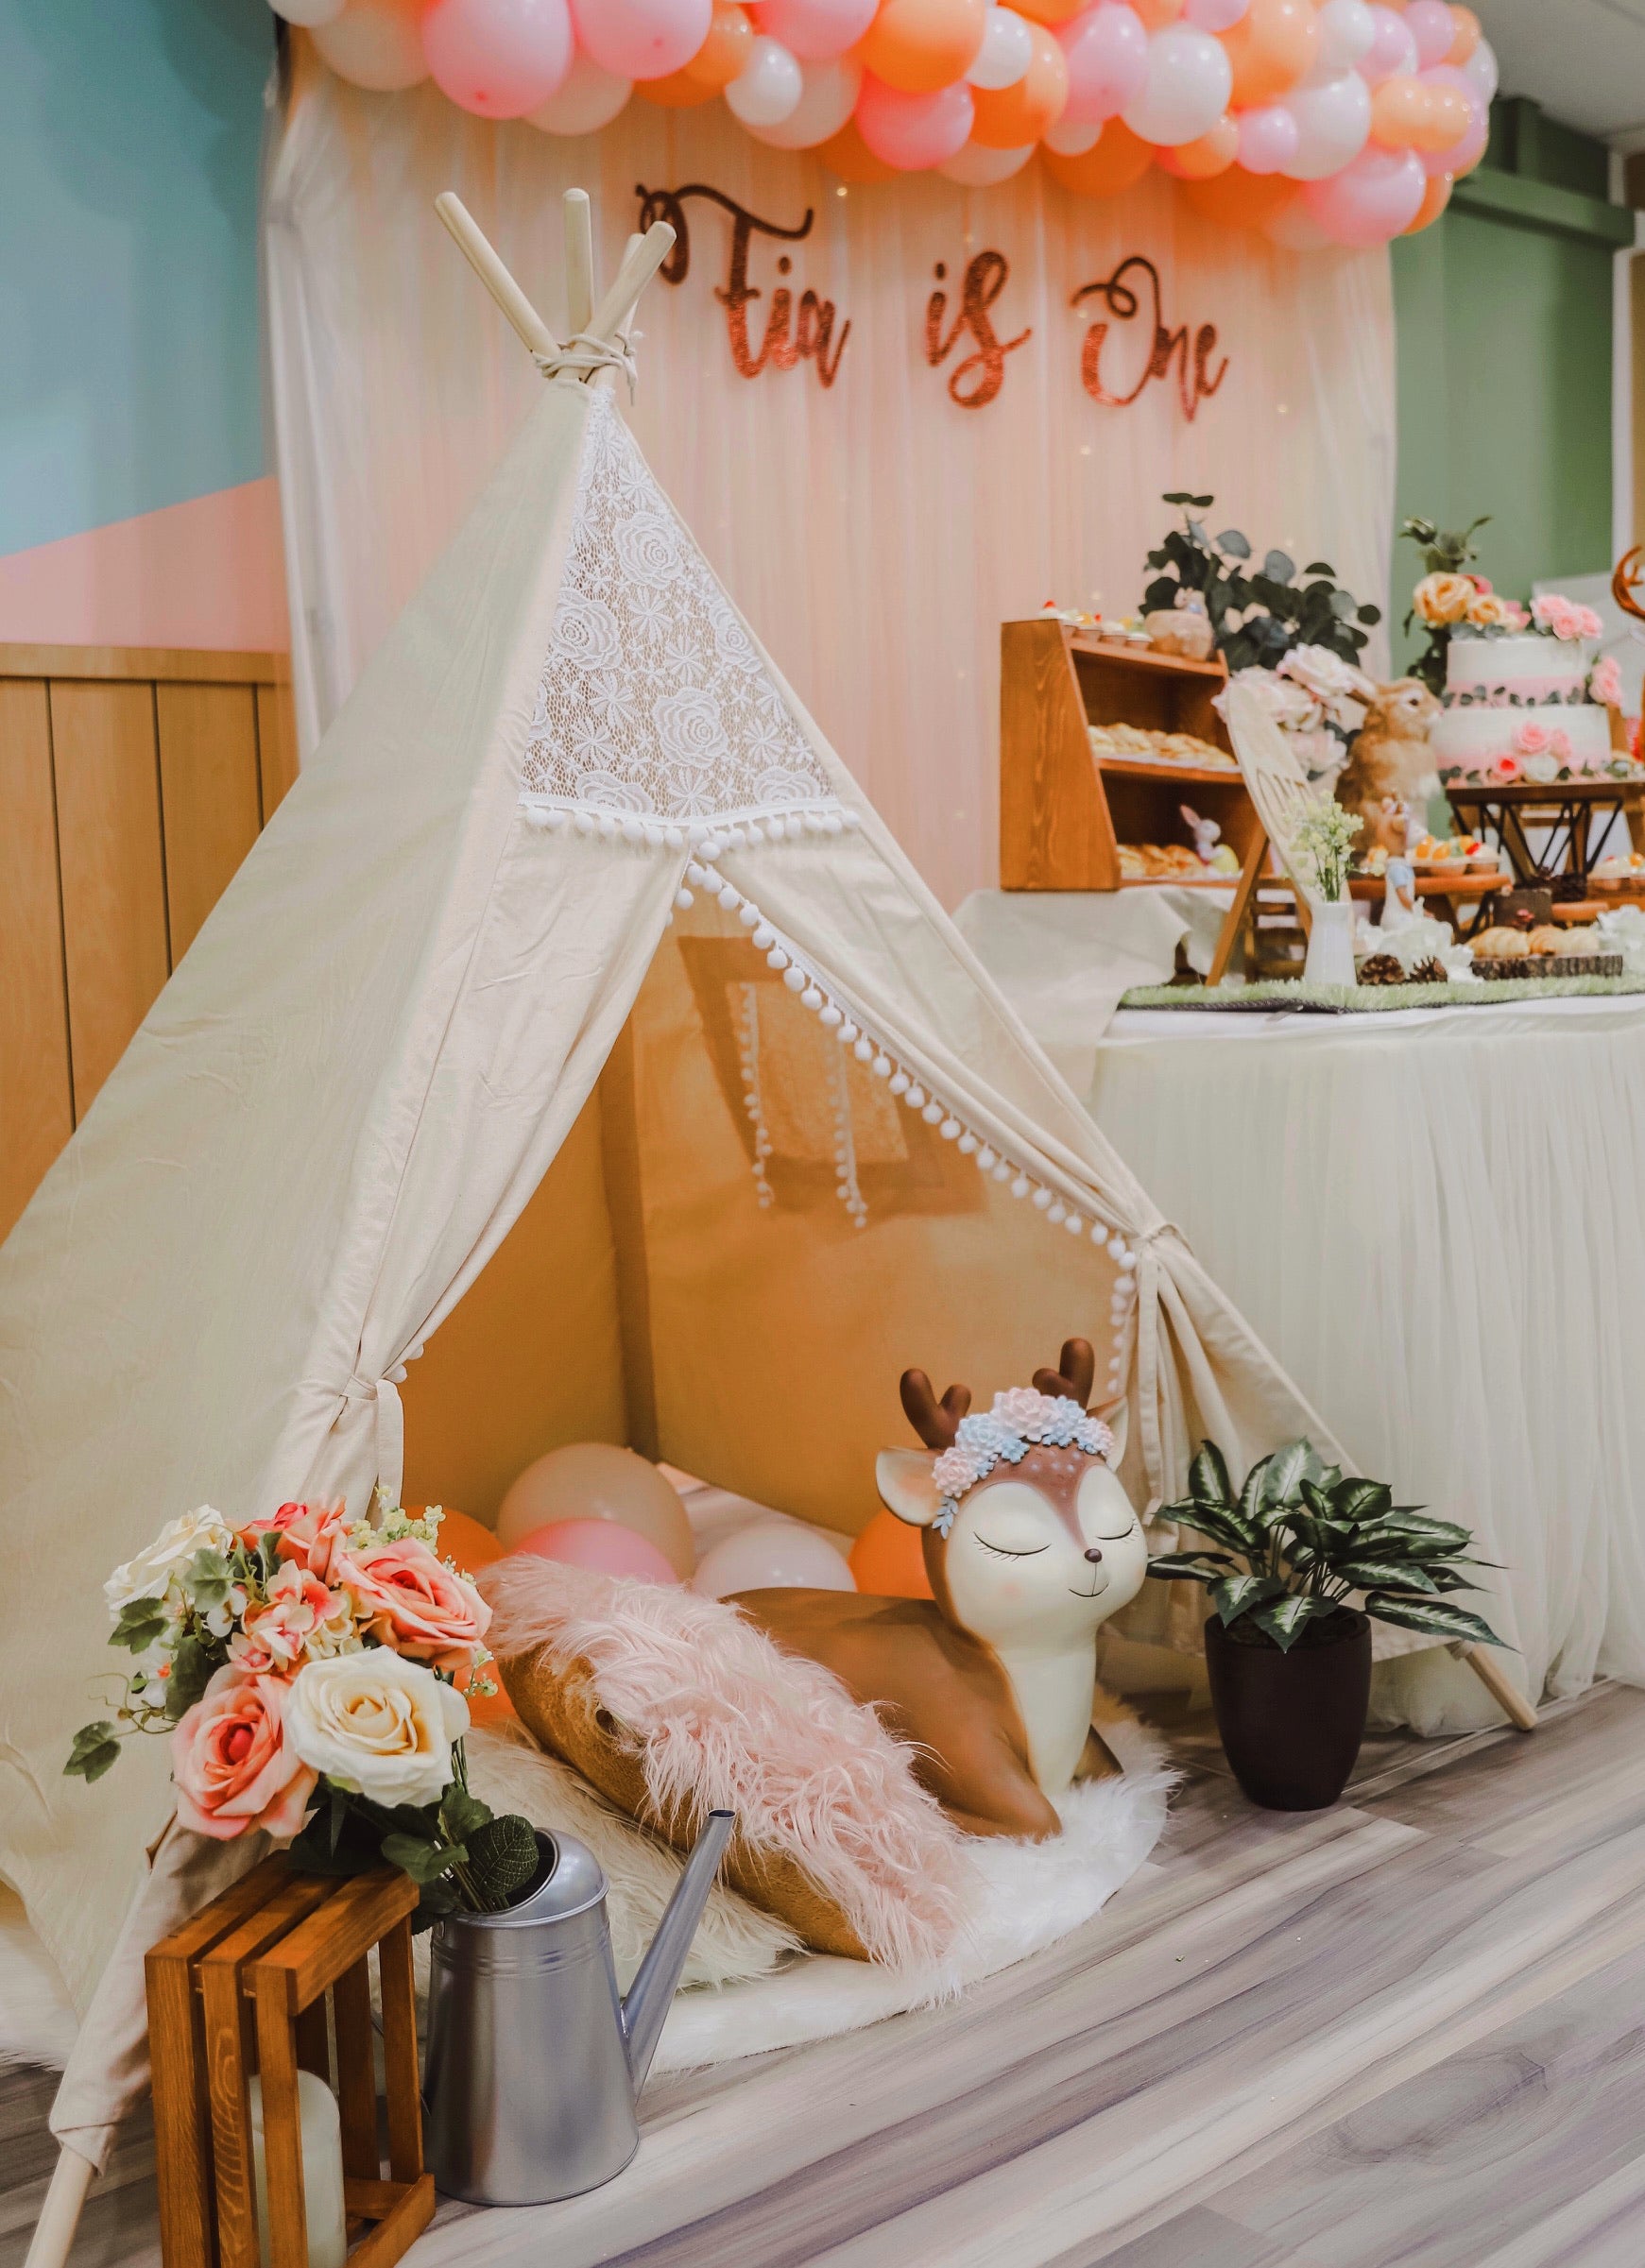 Rustic Lace Teepee Tent* – Style It Simply